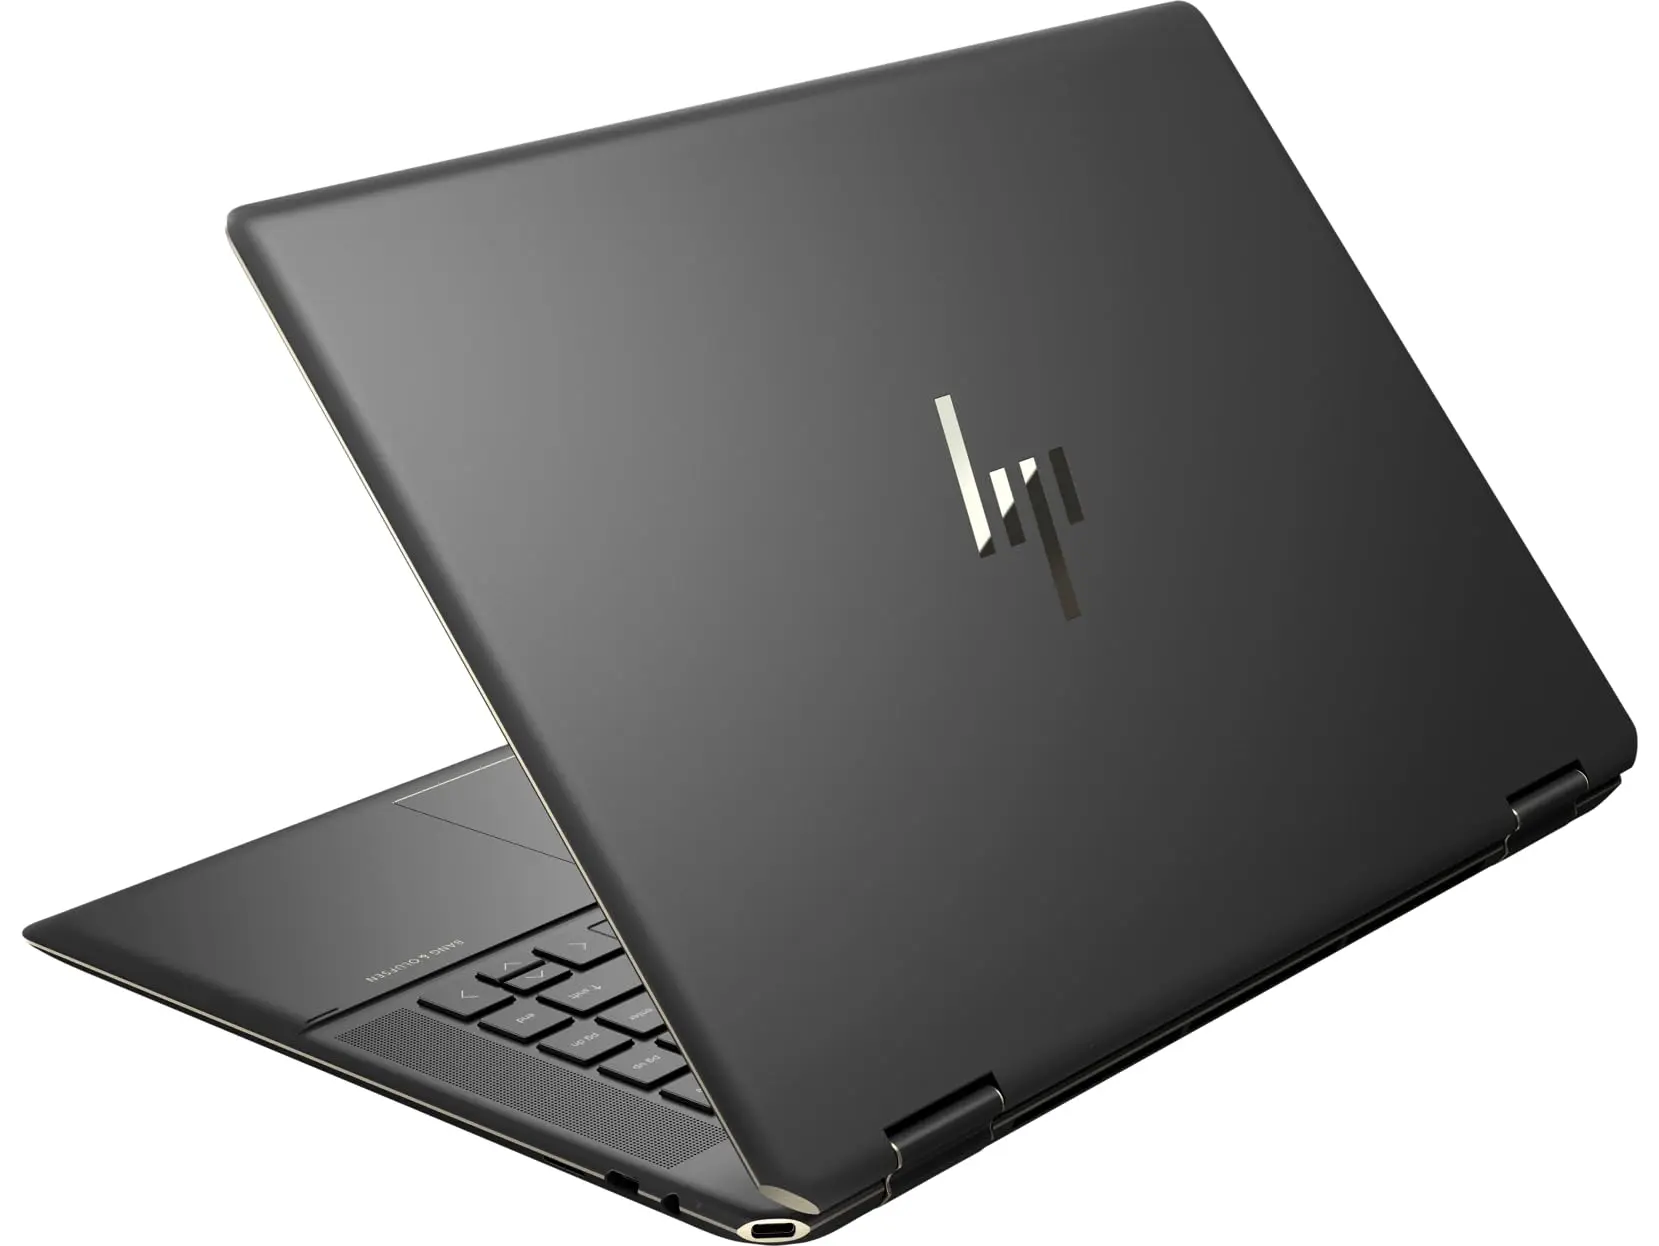 hewlett packard spectre bang & olufsen core i7 price - What is the price of HP Spectre Core i7 10TH gen